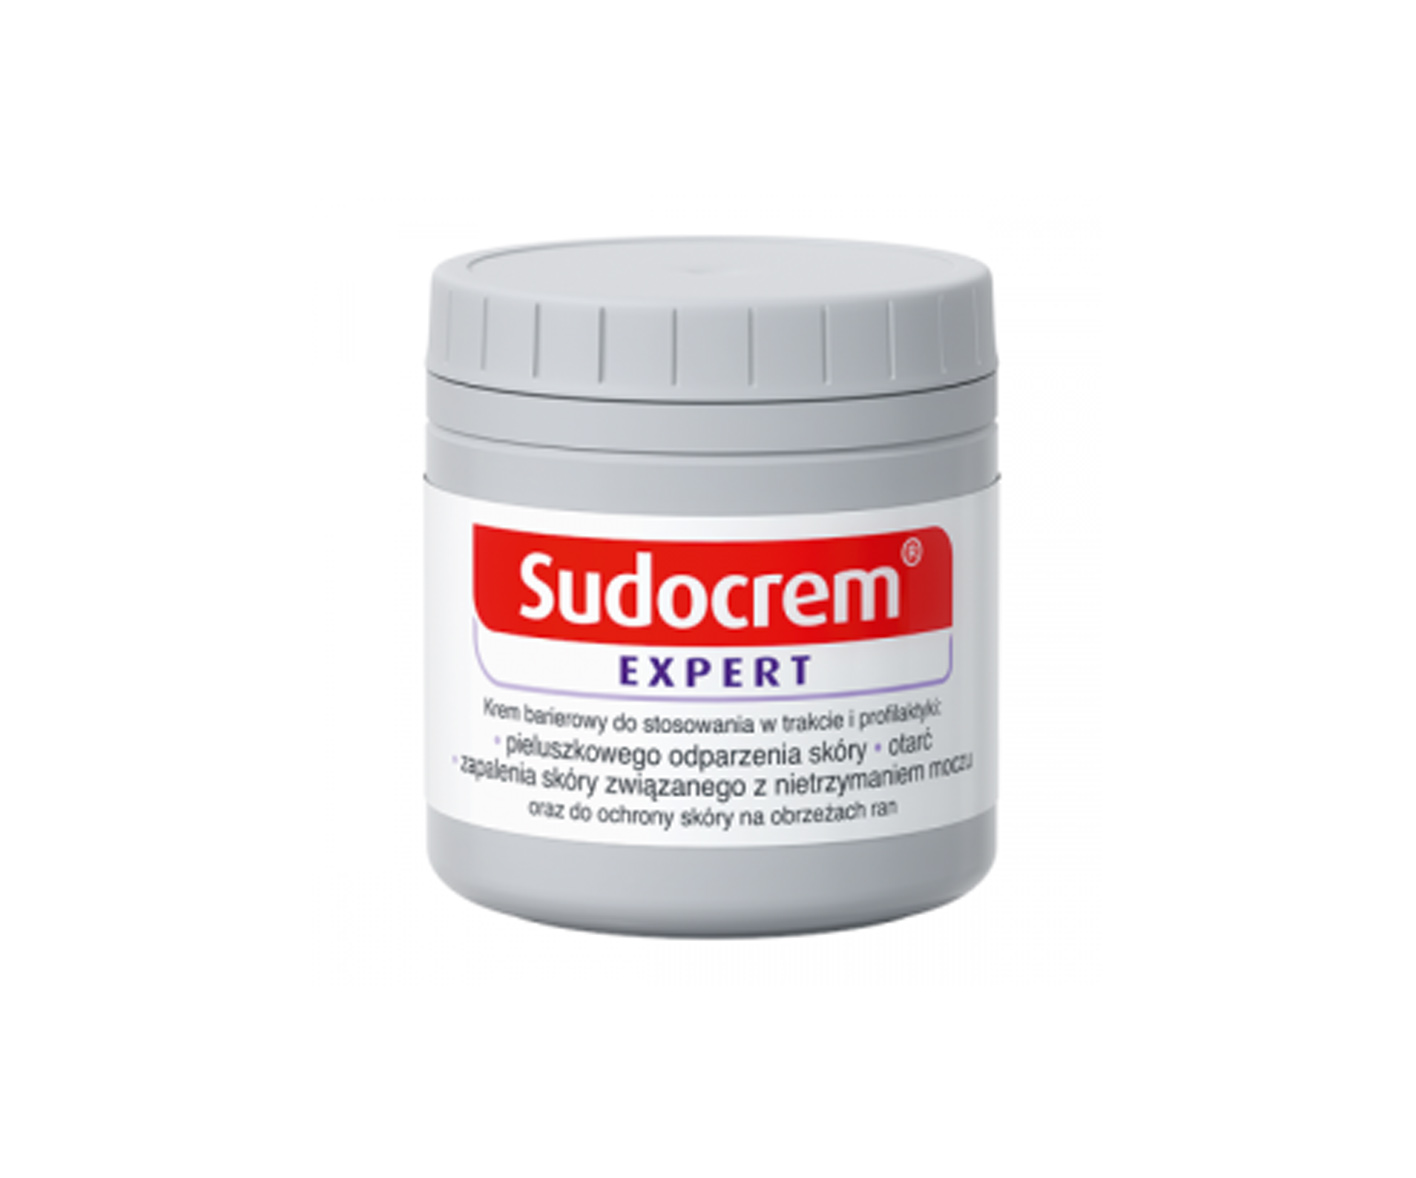 Sudokrem Expert, barrier cream for chafing and chafing with zinc oxide